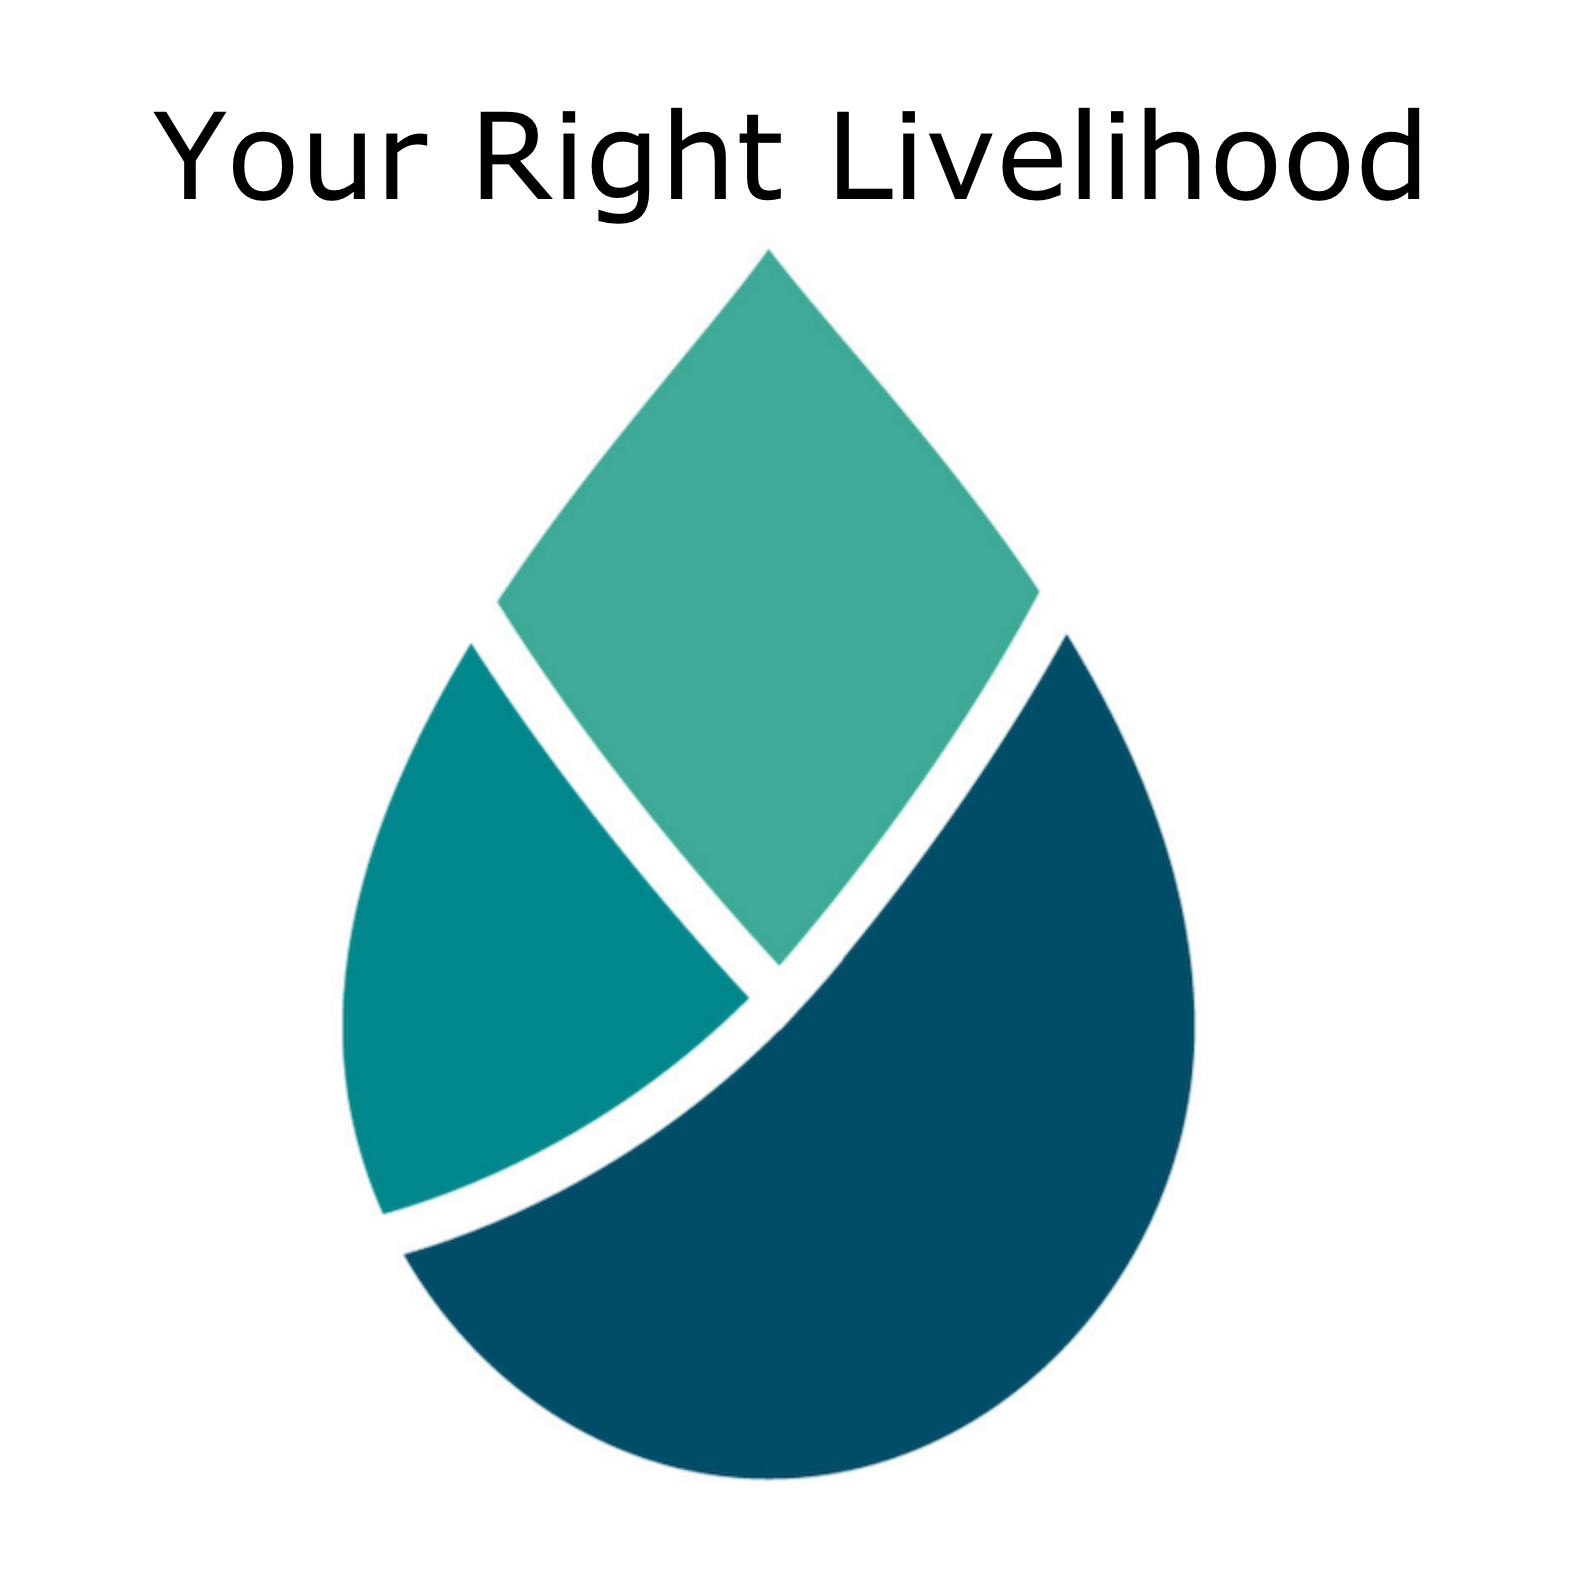 Your Right Livelihood